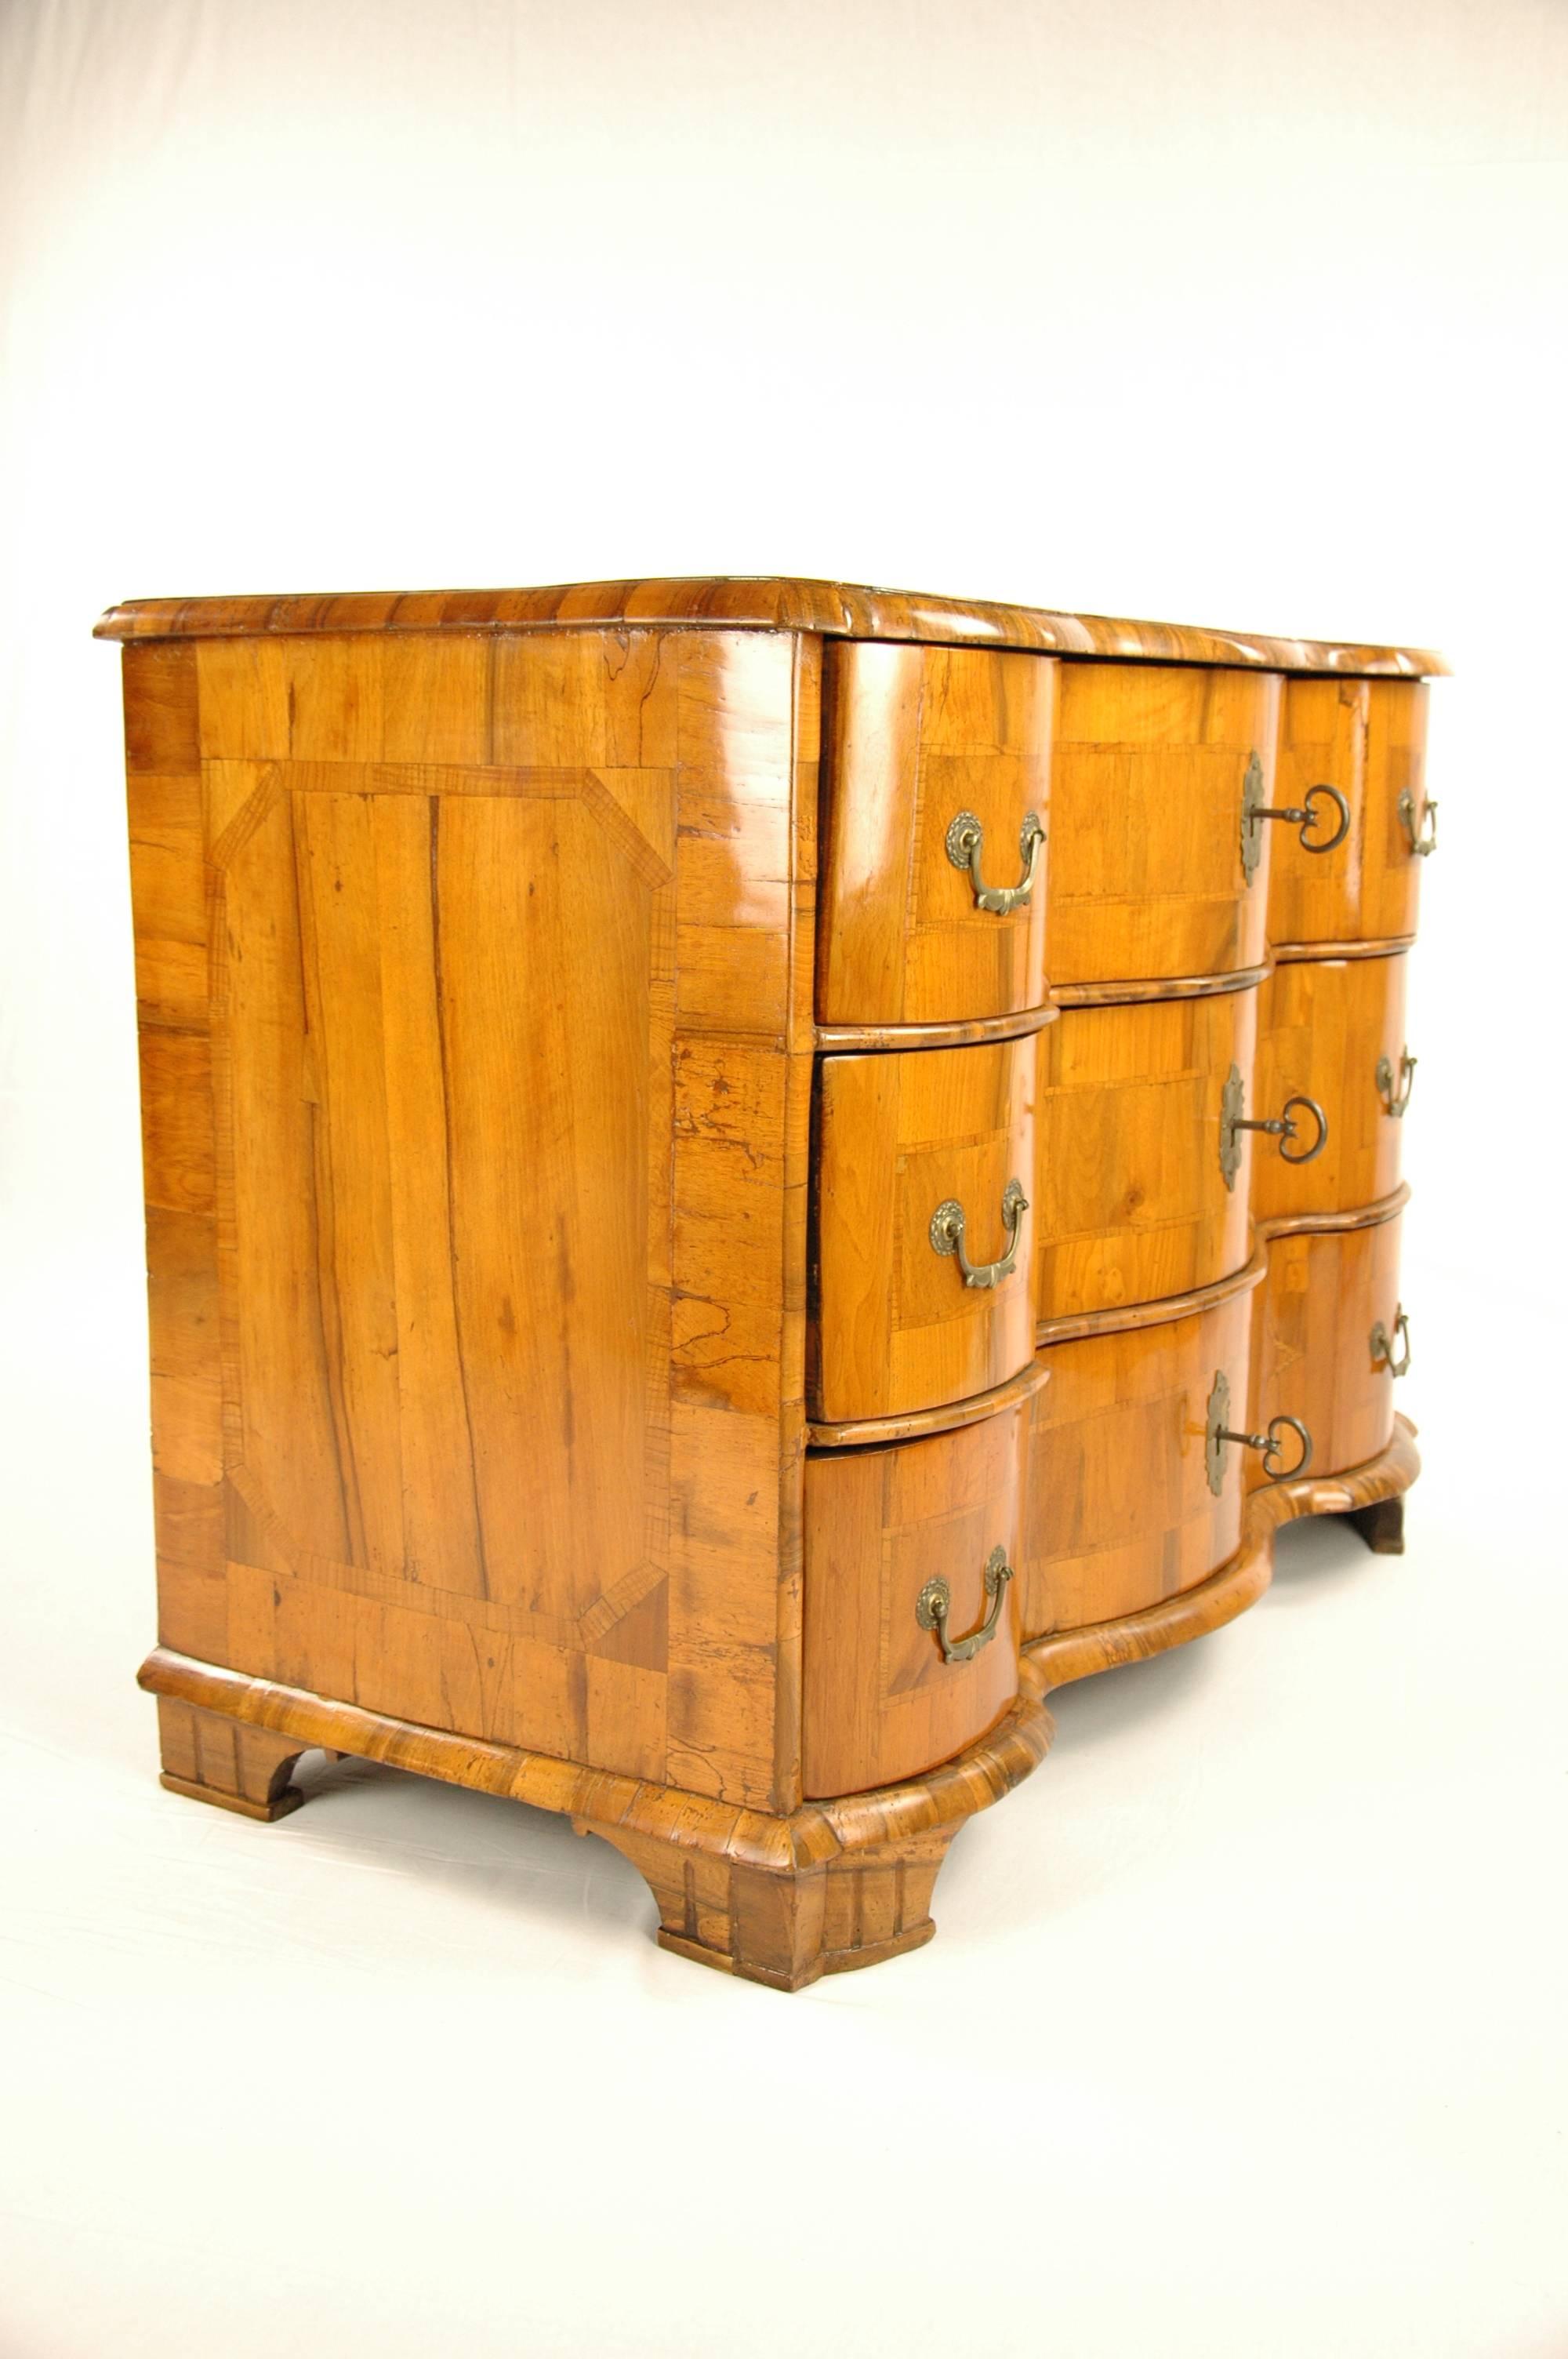 Walnut-tree
Baroque, circa 1760
Inlaid works
Three drawers
Restored residential-ready state
French shellac hand polish
Measures: Height 76.5 cm, width 105 cm, depth 55 cm

Delivery can be made to your door within 7 days worldwide. We already